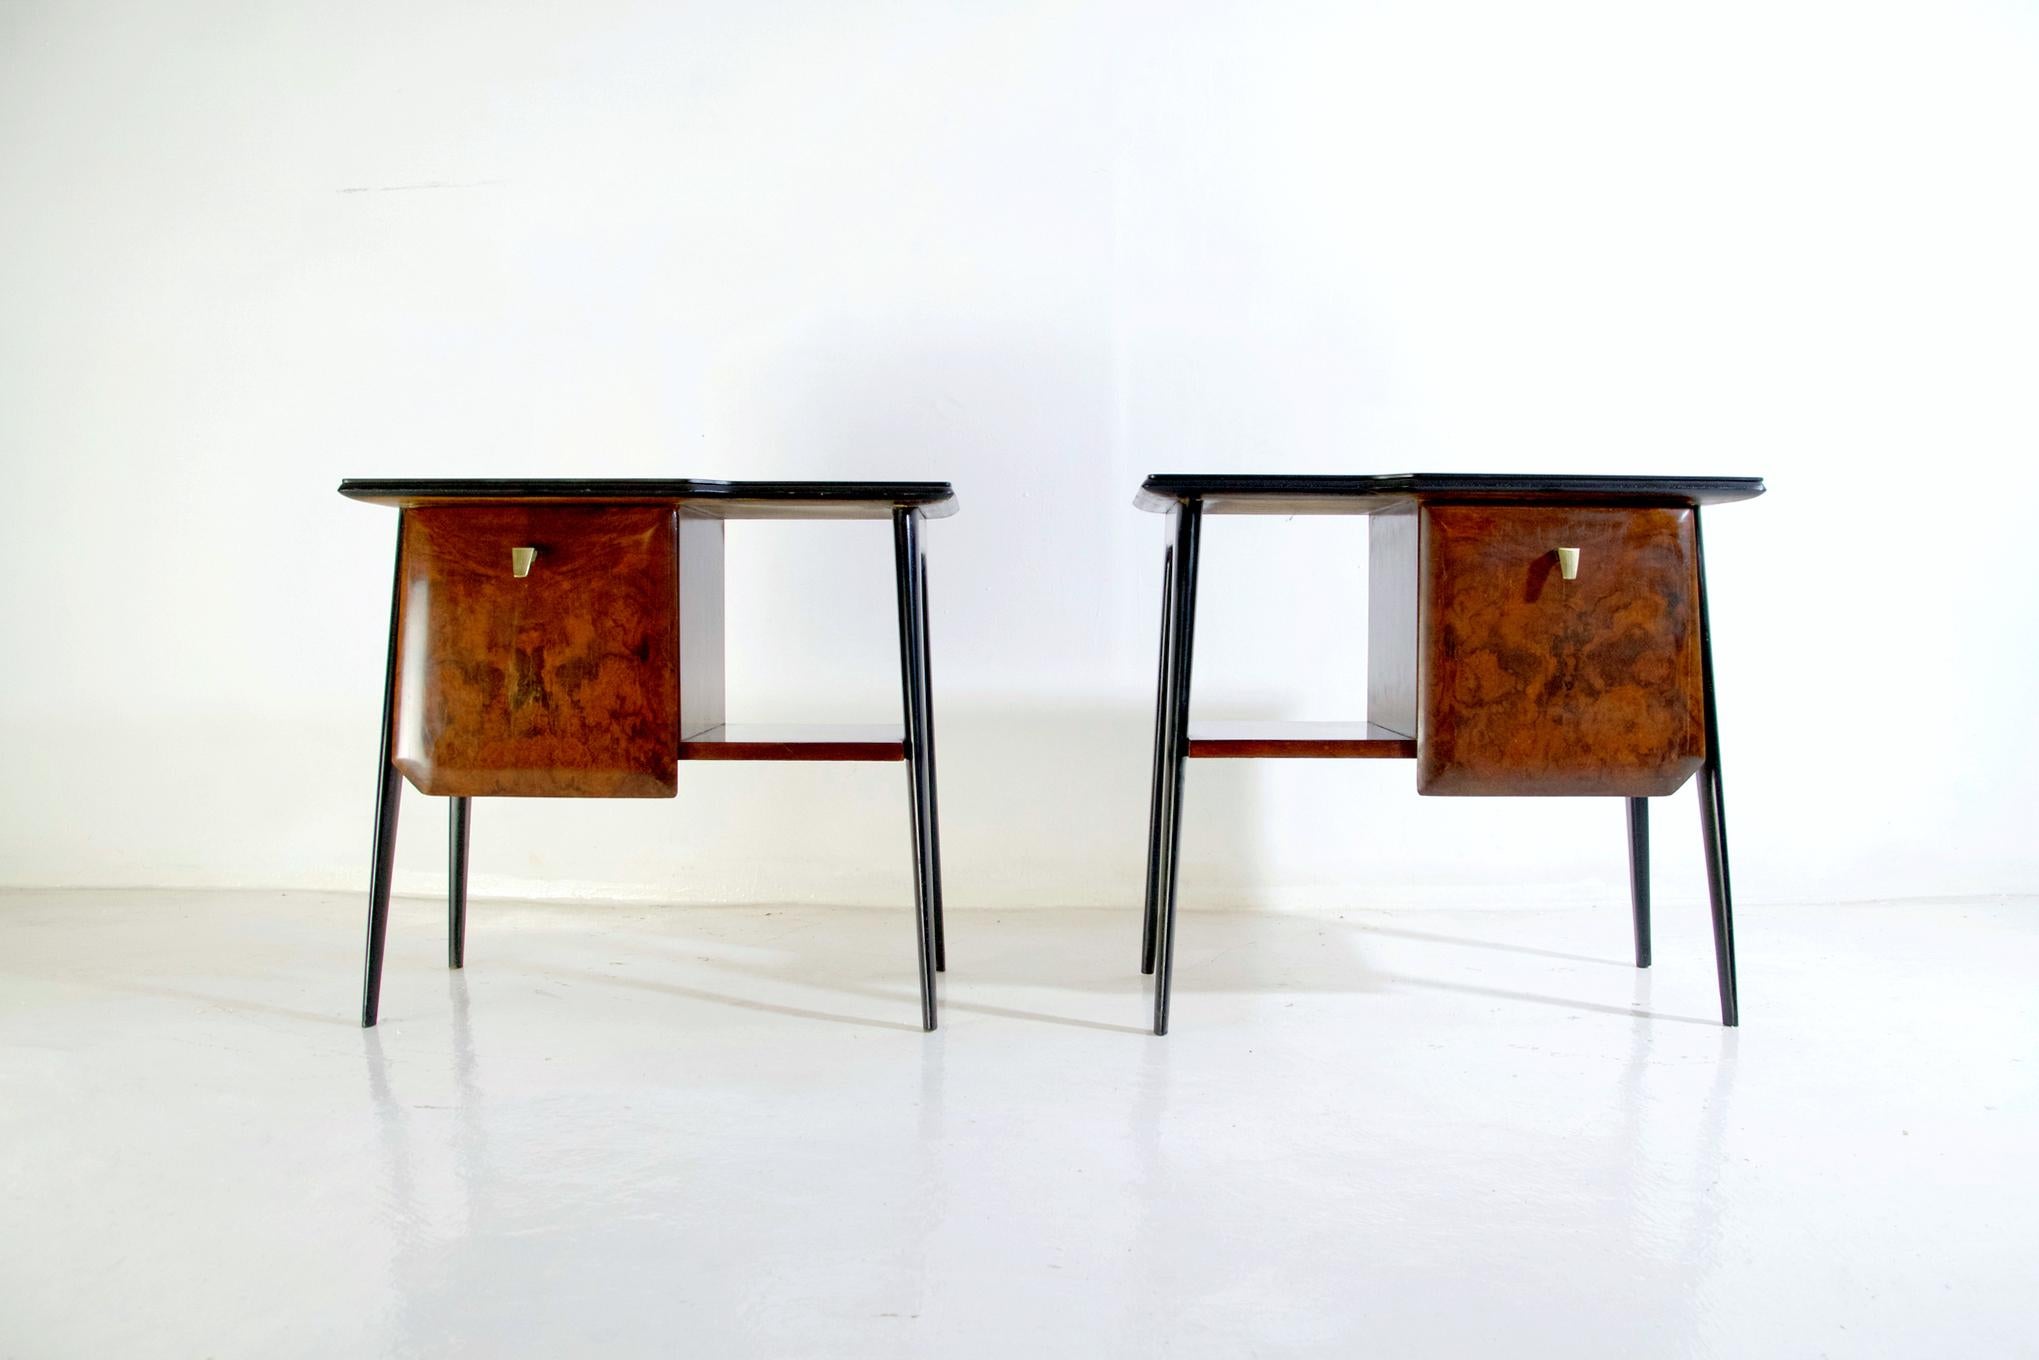 A pair of nightstands with a clean design in walnut burl wood, glass top and legs in blackened ash wood. Each nightstand has a small cabinet with a brass handle and an open shelf next to it. In excellent restored condition.